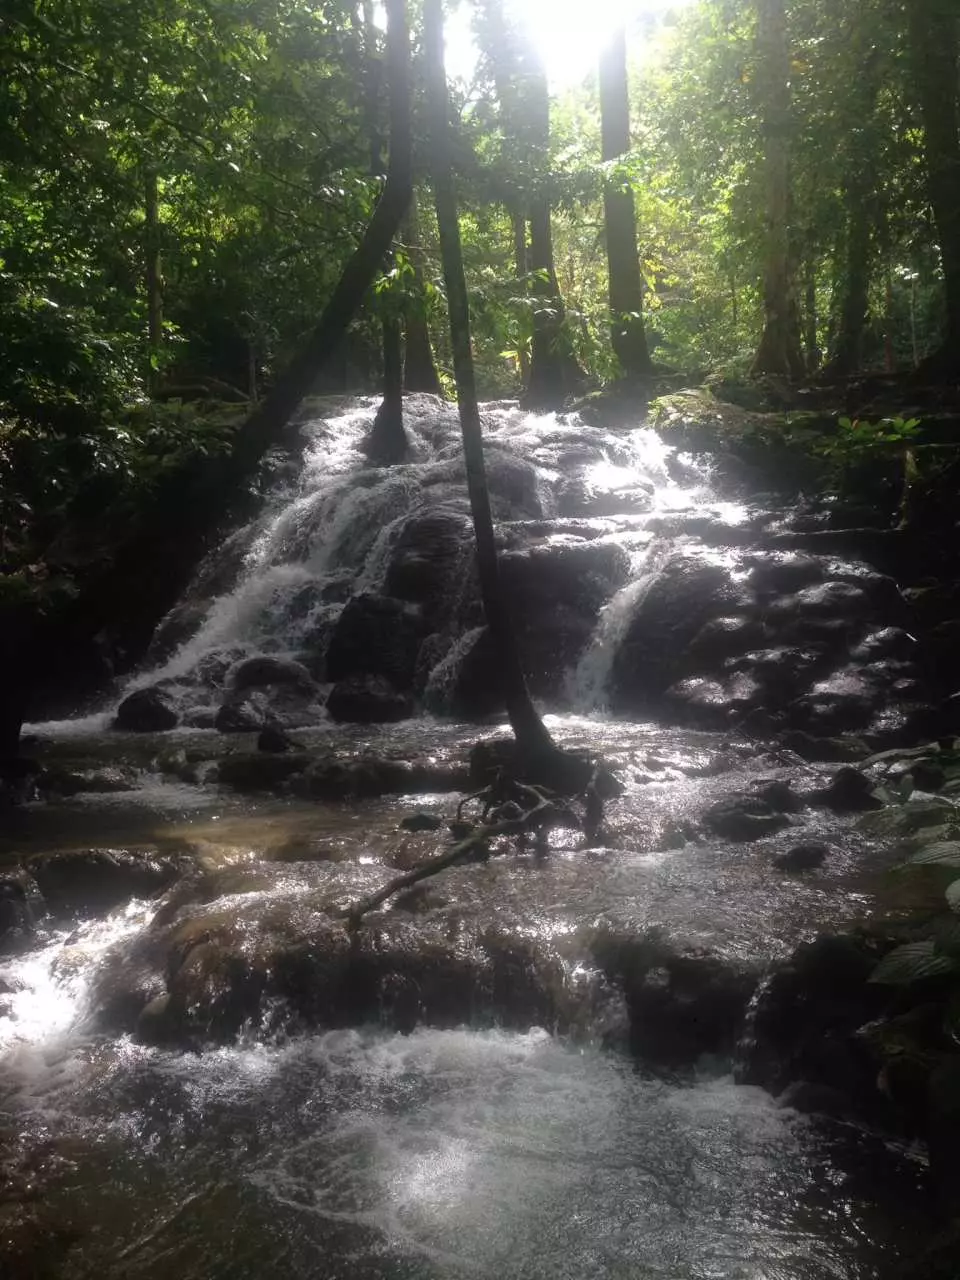 Visit a tropical waterfall and enjoy the tranquility